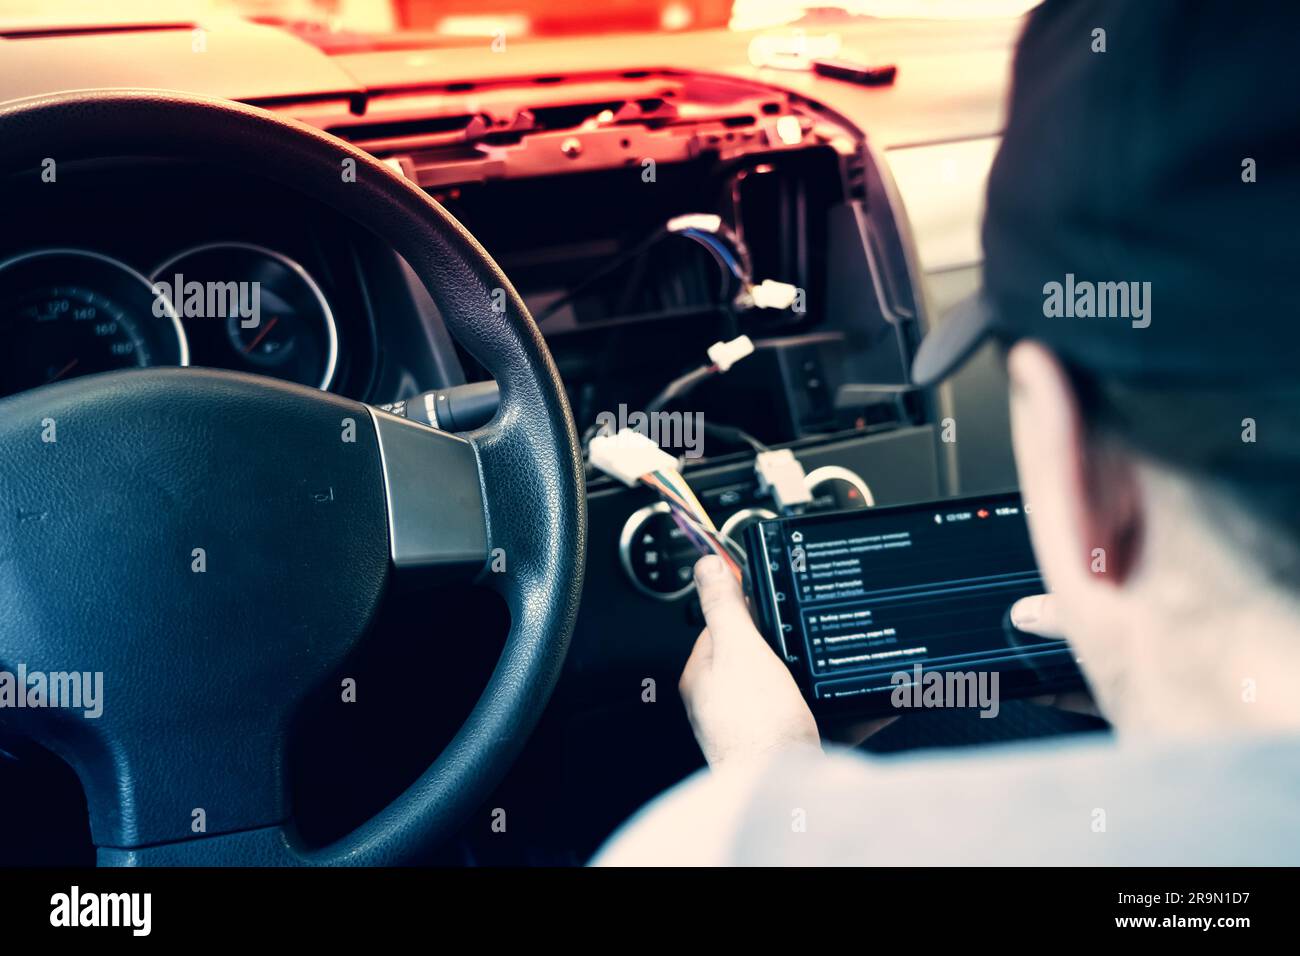 Auto in Car Service, process of installing modern 2-din radio sound system. Auto electric hands on dashboard fixing problem close-up. Stock Photo